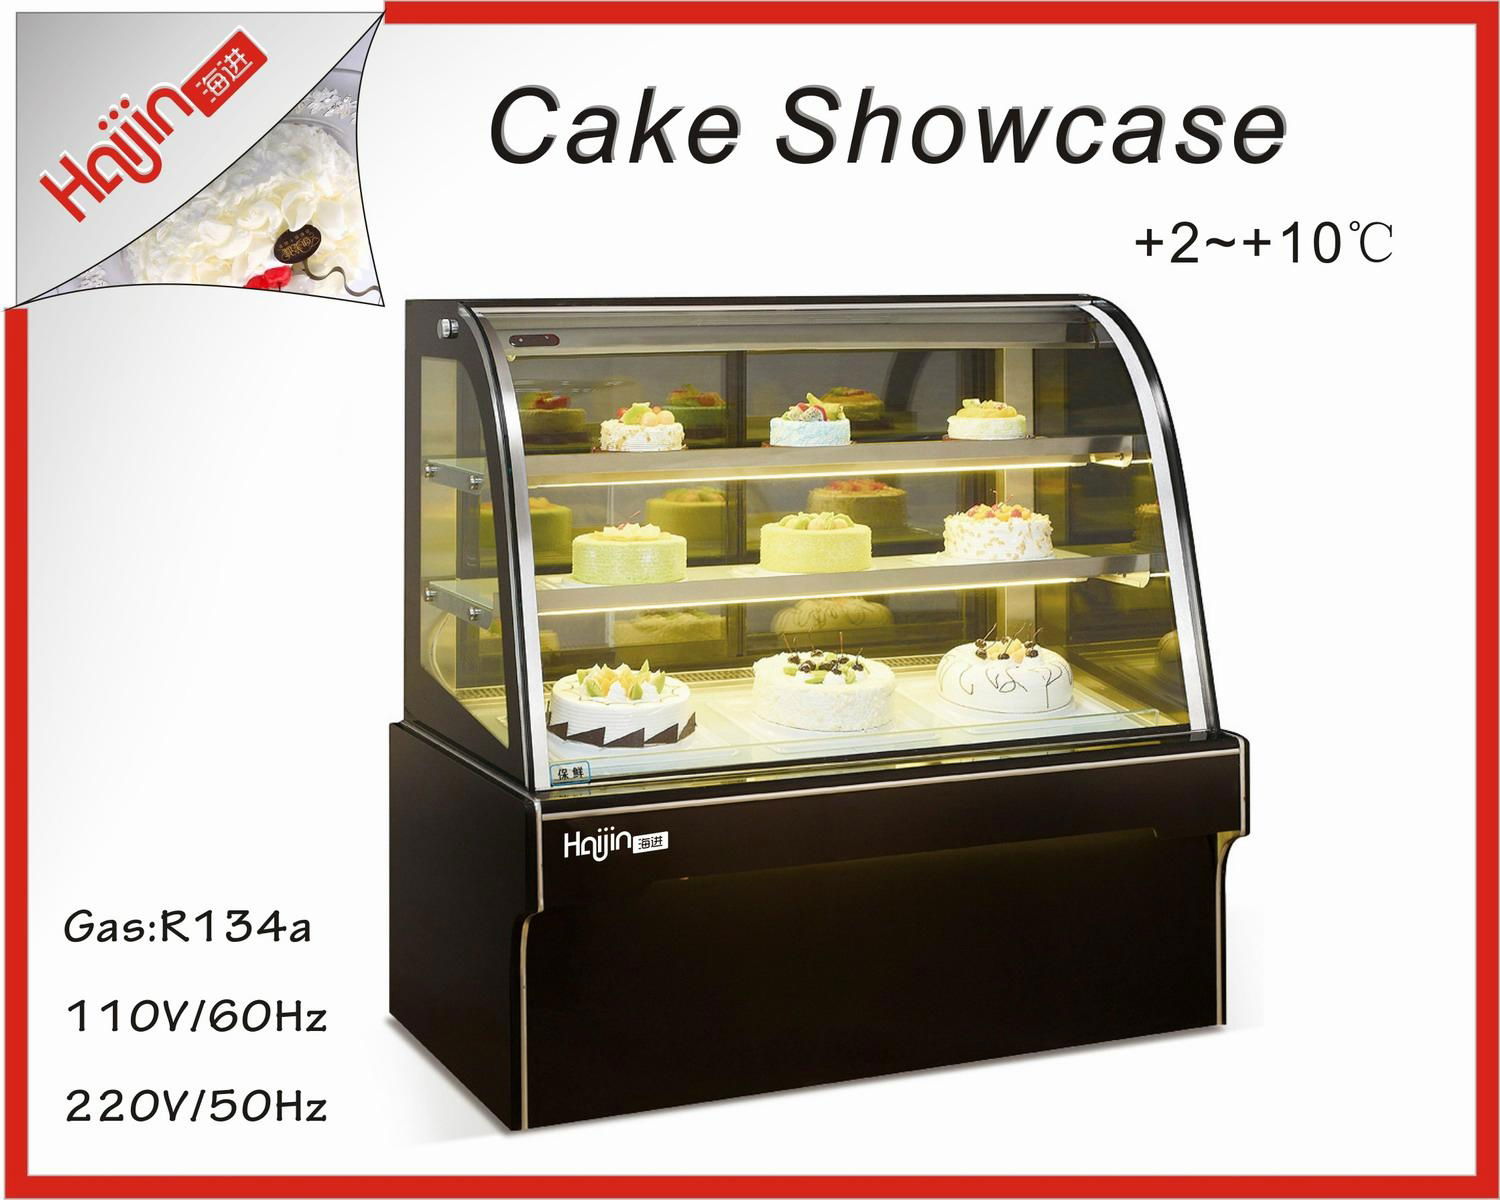 Article elegant marble base for cake display fridge with wooden package